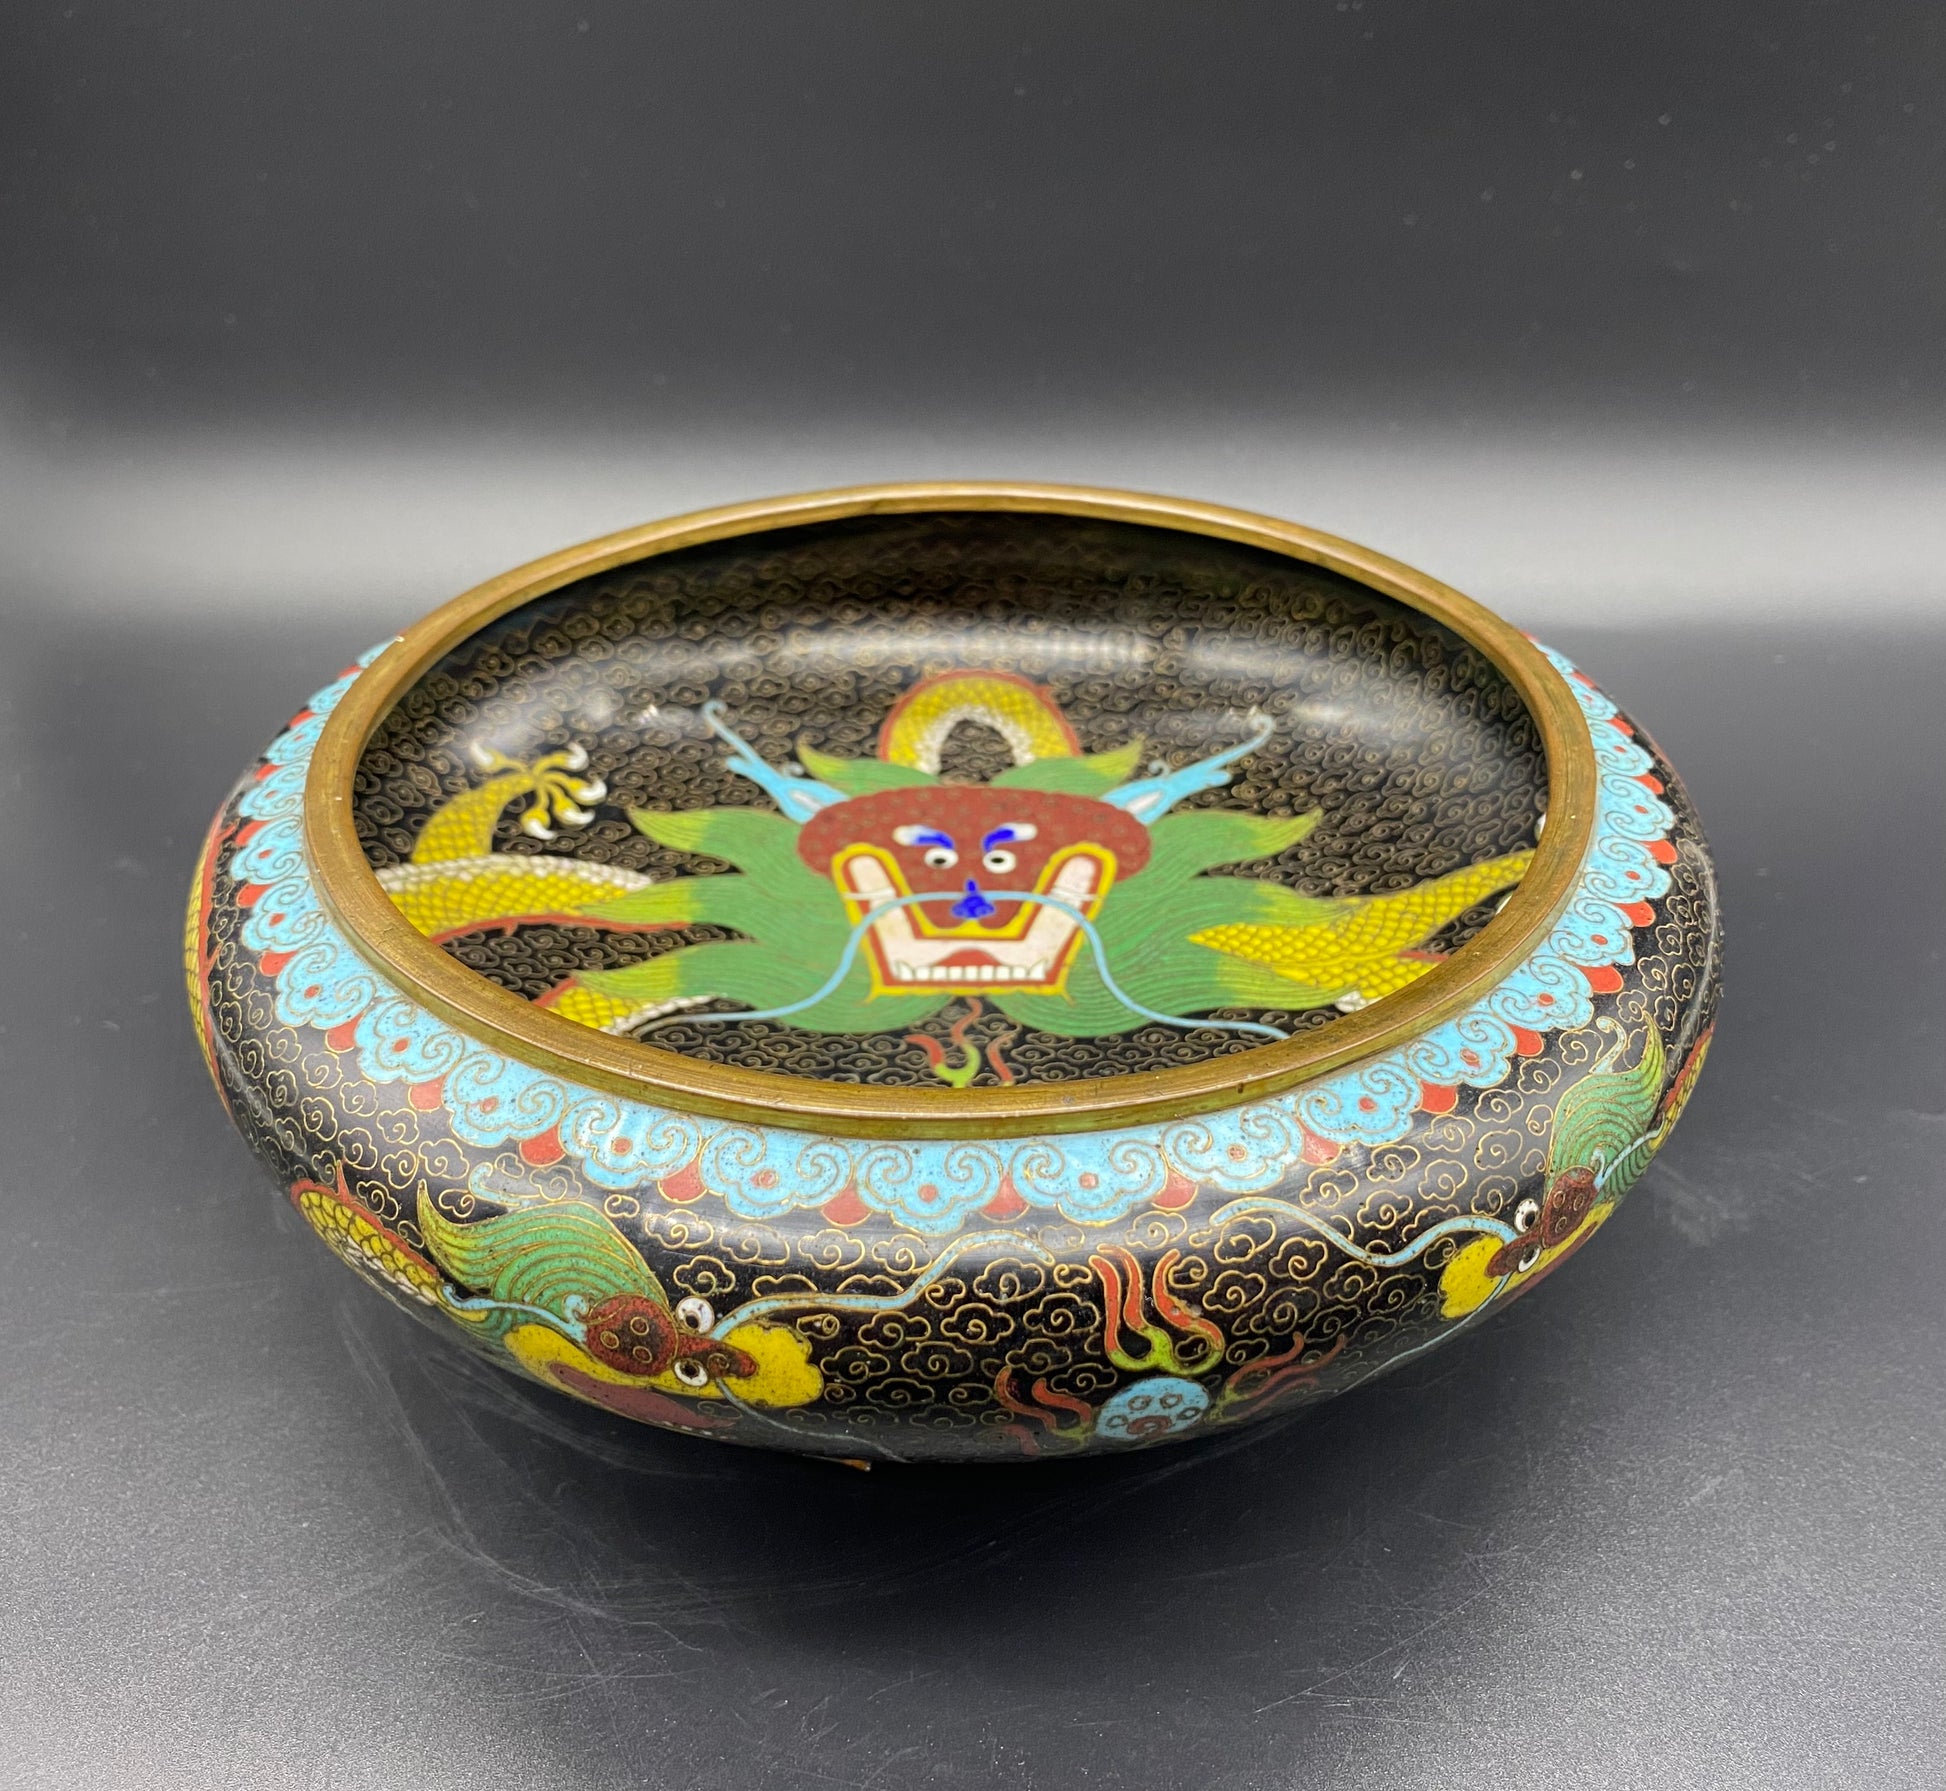 The main image in the interior of the bowl shows a five-toed Chinese dragon with a yellow body and blue face with a flaming pearl placed right in the centre. ANTIQUES ONLINE USA 